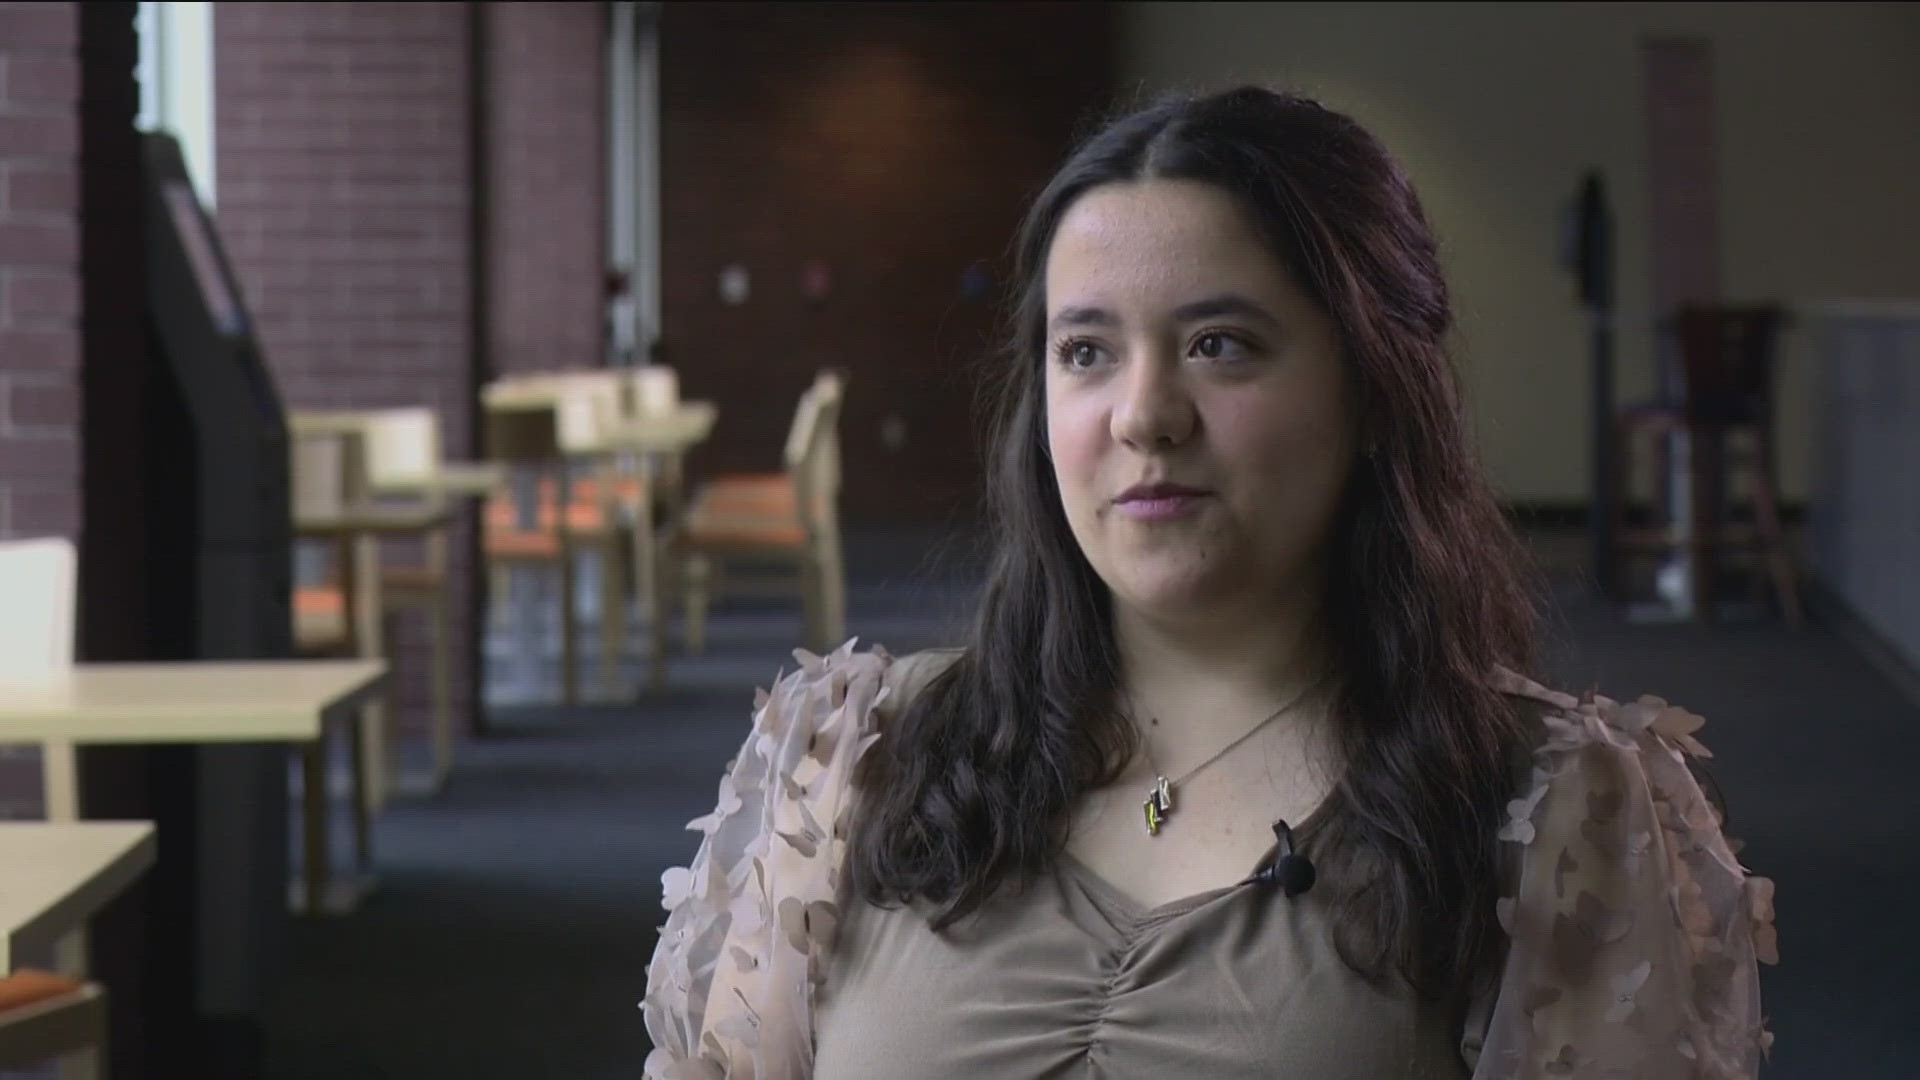 Andrea Terés-Martinez was honored as a Top 10 Scholar at Boise State University. She also was first to receive a scholarship established by former KTVB staffers.